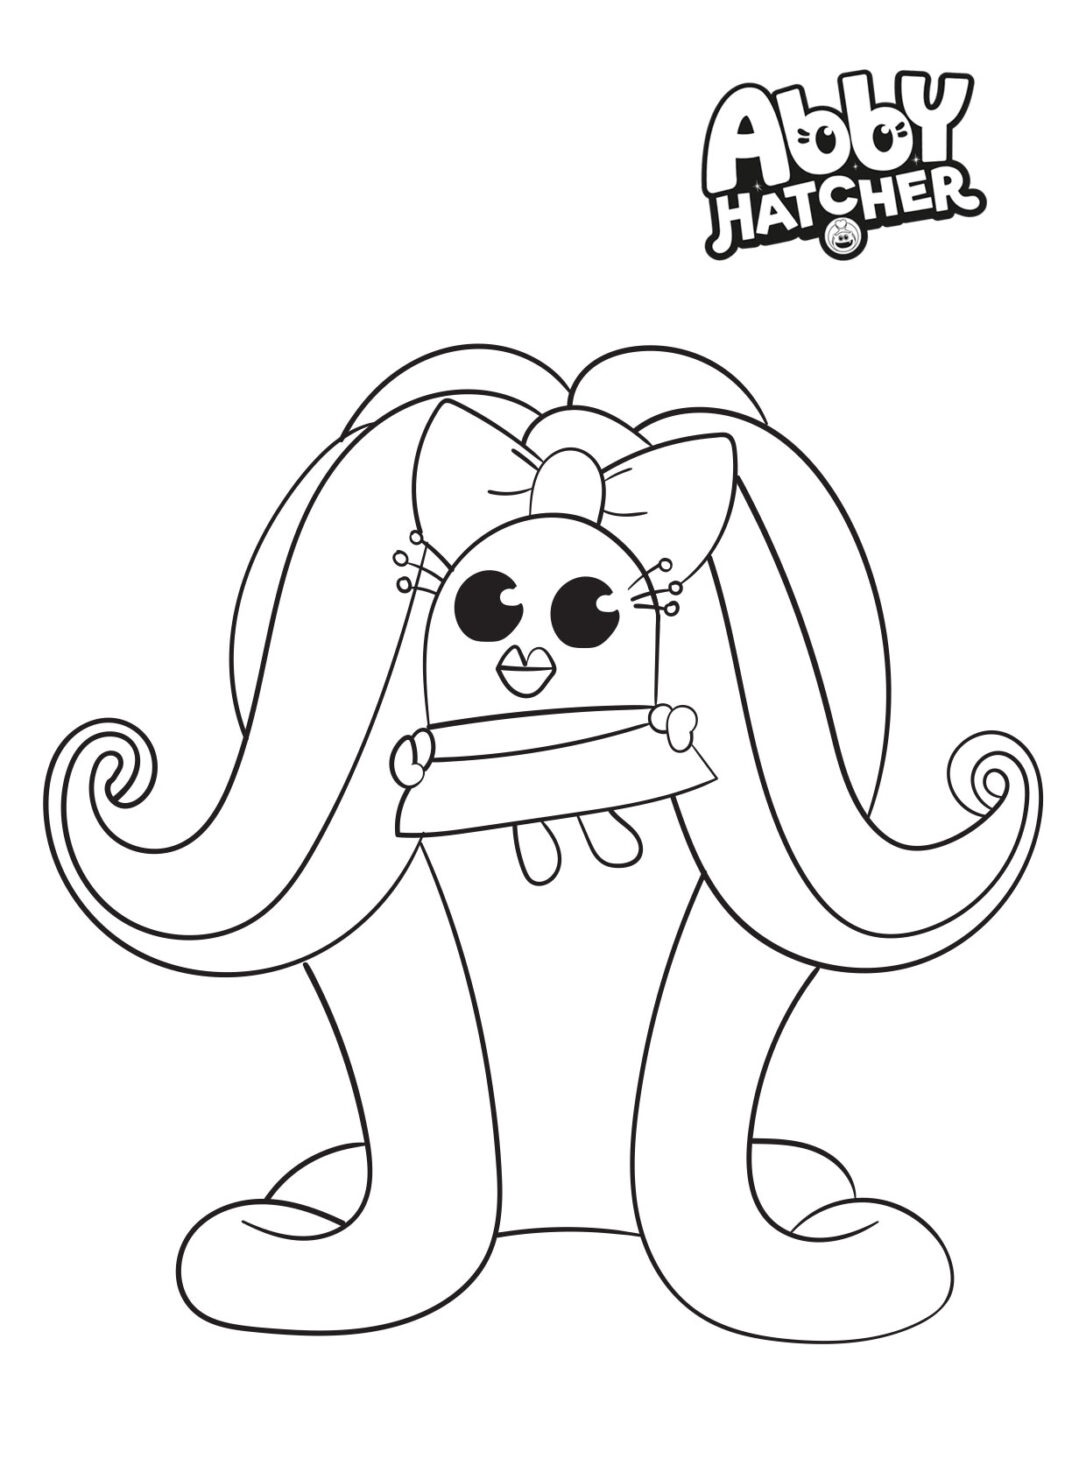 Printable Abby Hatcher Coloring Pages Pdf For Kids - Abby Hatcher Harriet Coloring Page